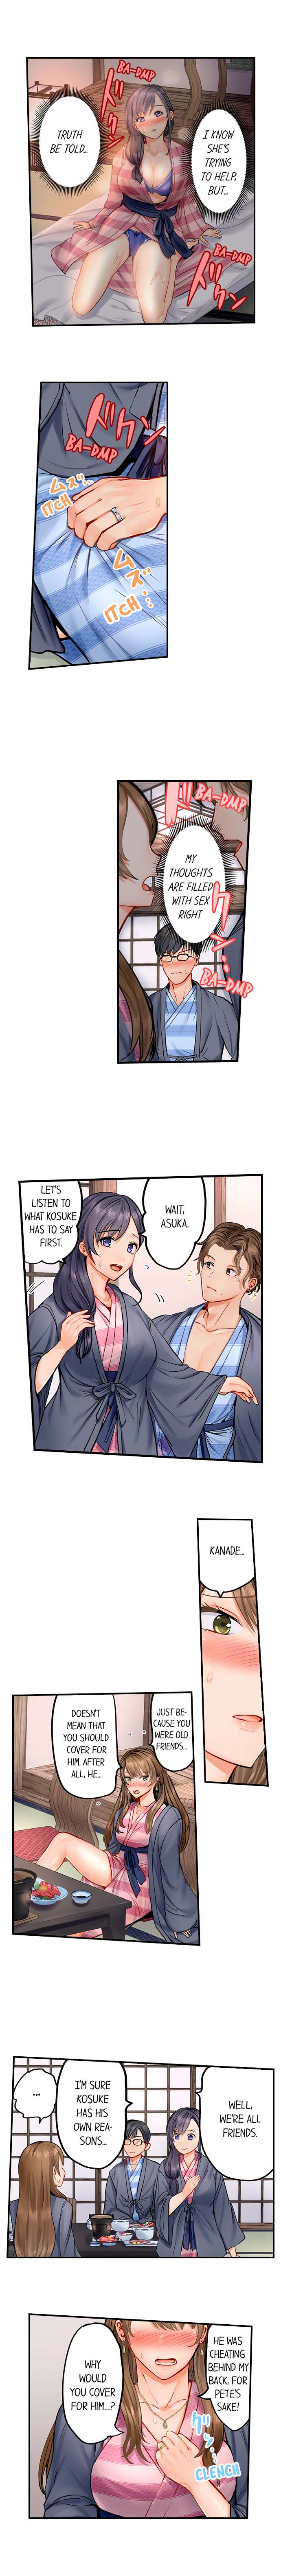 [Peter Mittsuru] Married Couple Swap: He’s Better Than My Husband (Ch.1-69) [English] - Page 5